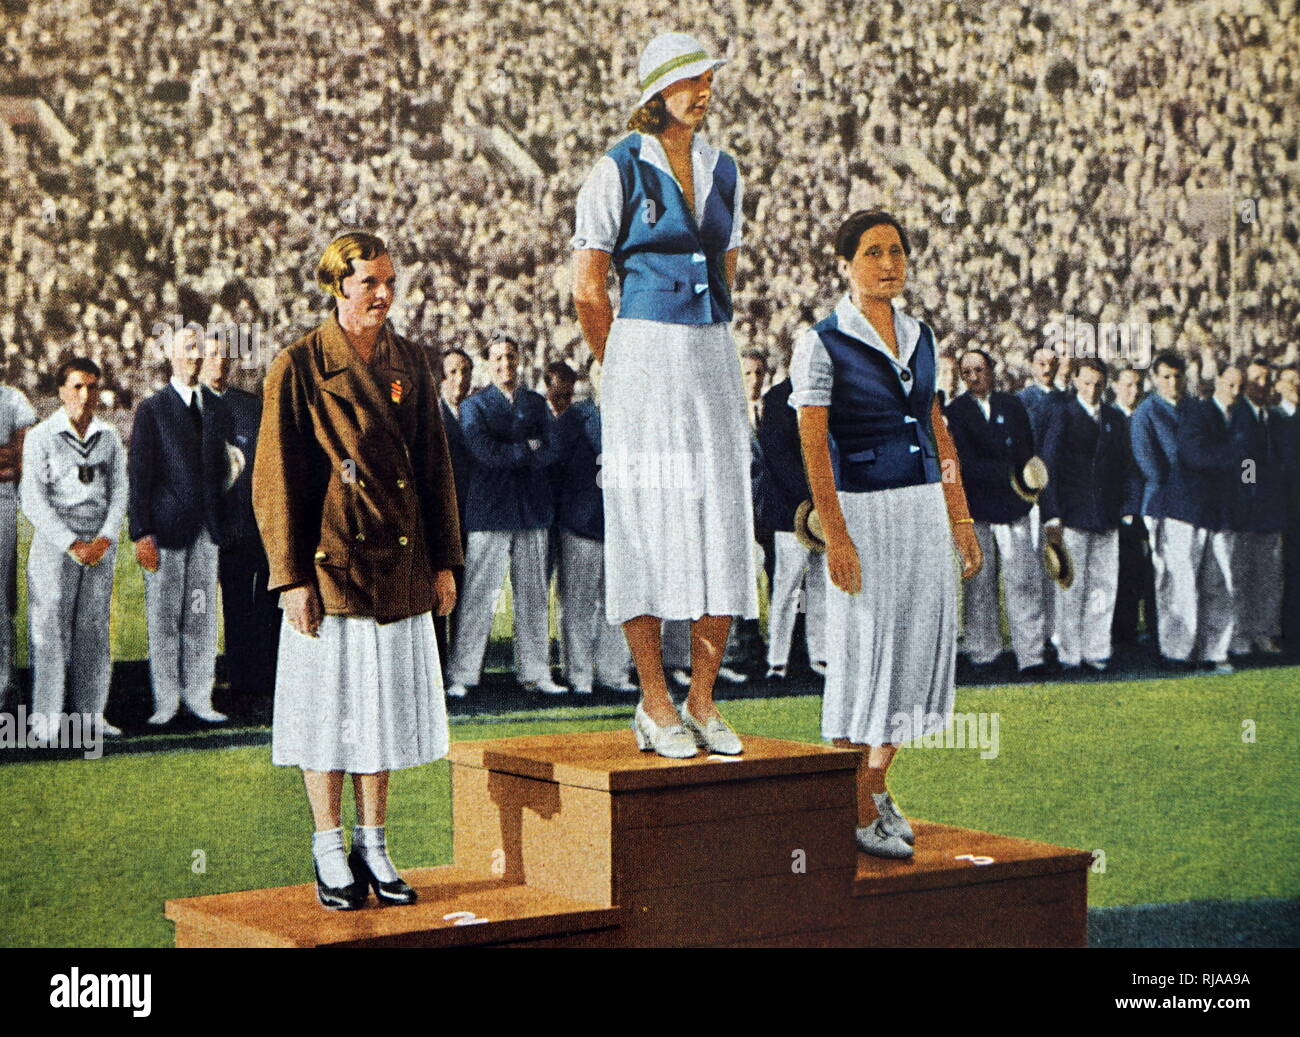 Photograph (from left to right) of Helene Emma Madison (1913 - 1970) from the USA with Willemijntje den Ouden (1918 - 1997) from the Netherlands and Eleanor Saville (1909 - 1998) during the 1932 Olympic games. These women competed in the 100 meter freestyle, Helene took gold, Willy took silver and Eleanor bronze. Stock Photo